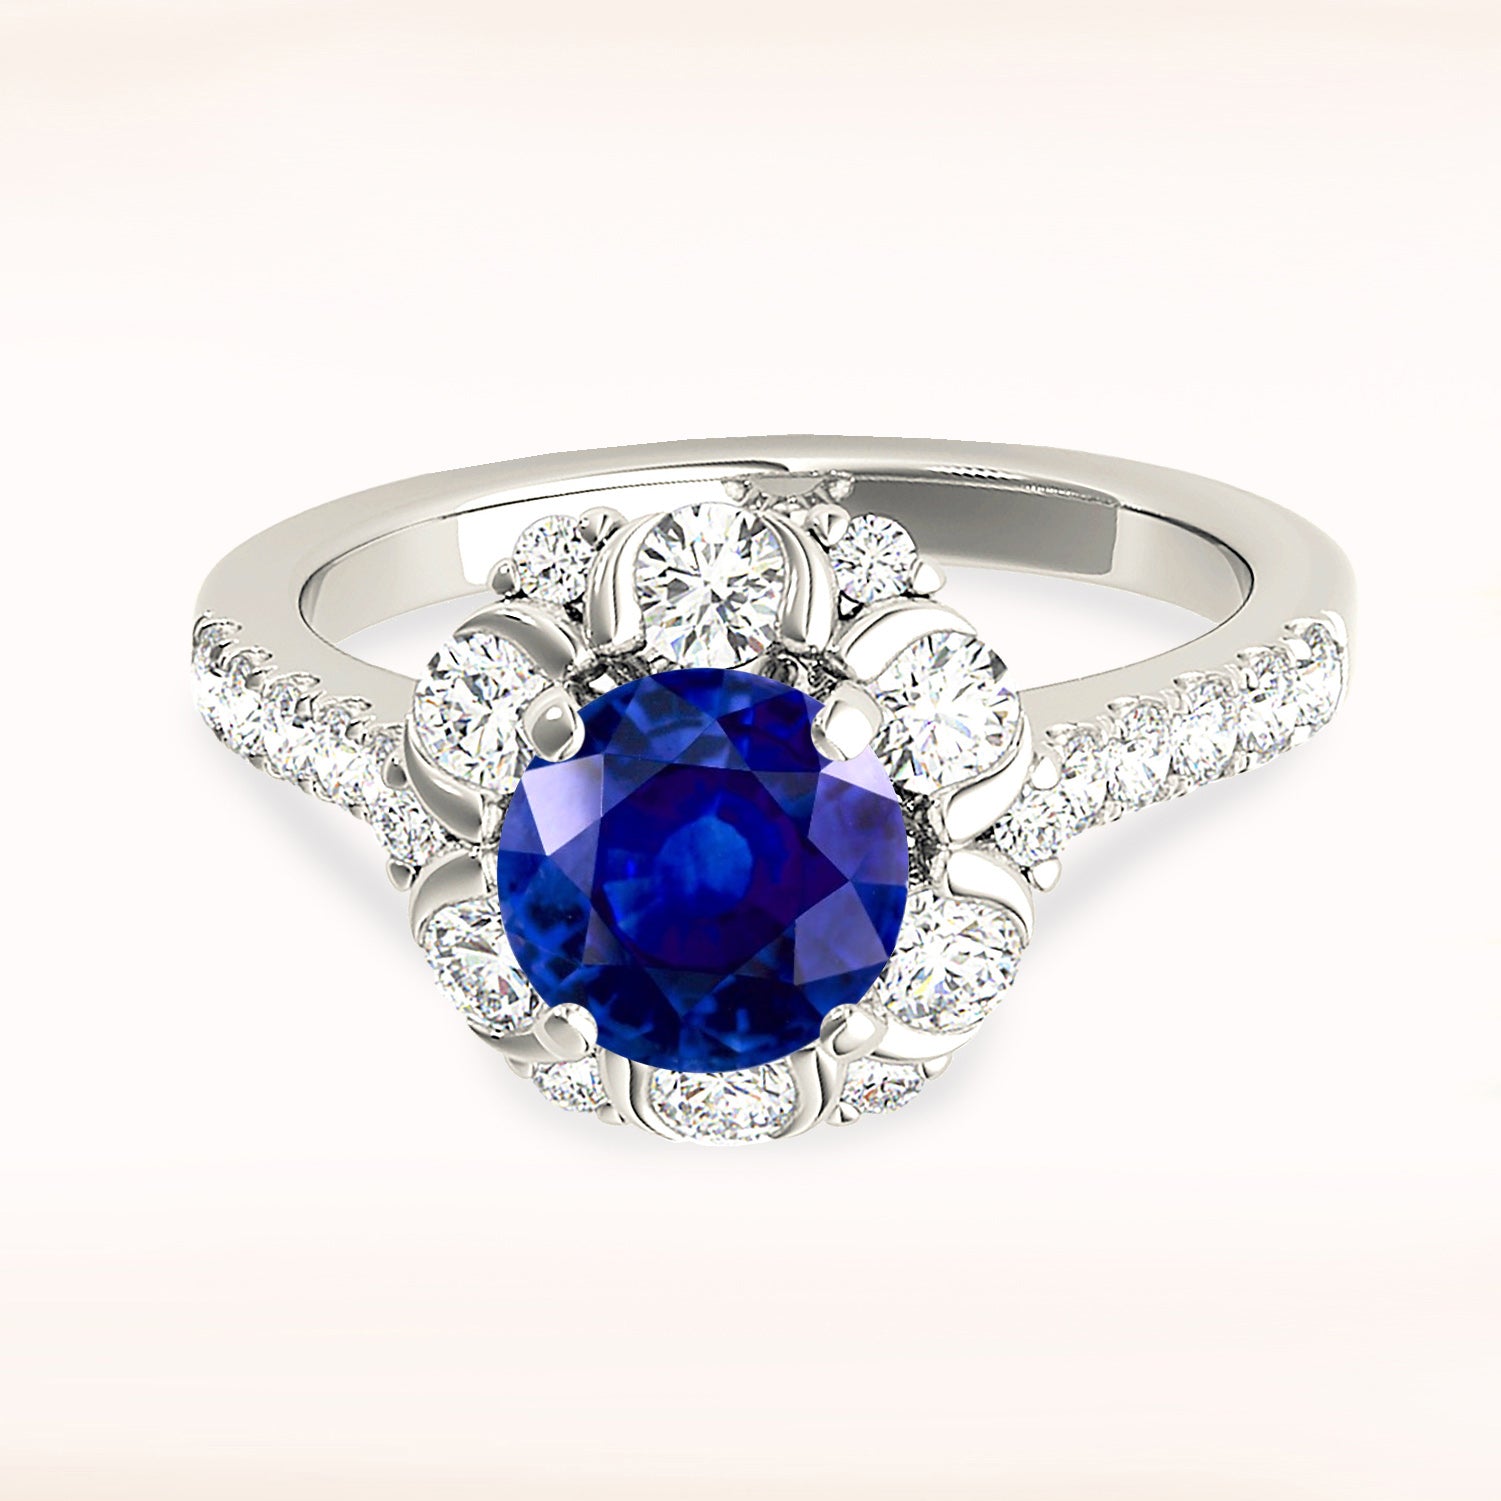 1.35 ct. Genuine Blue Sapphire Ring With 0.90 ctw. Diamond Floral Halo, Delicate Diamond Band | Natural Sapphire And Diamond Gemstone Ring-in 14K/18K White, Yellow, Rose Gold and Platinum - Christmas Jewelry Gift -VIRABYANI